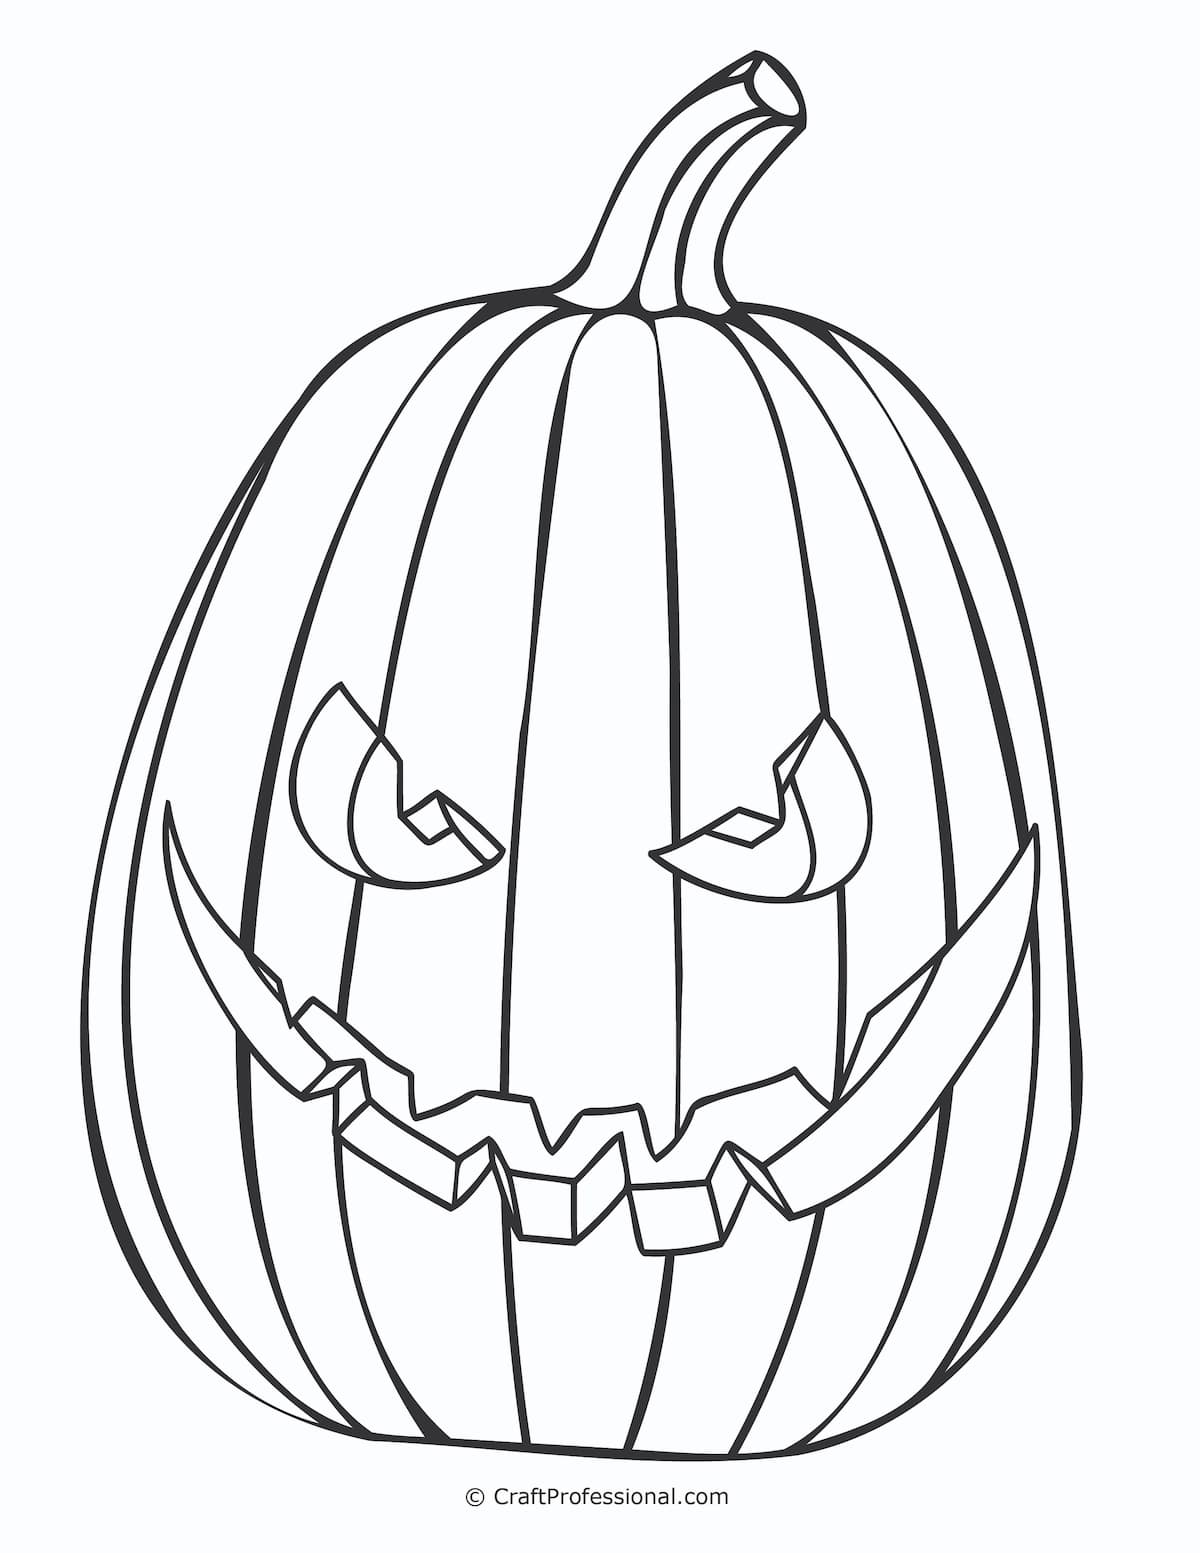 19 Pumpkin Coloring Pages - Free Printables For Kids &Amp; Adults To Color